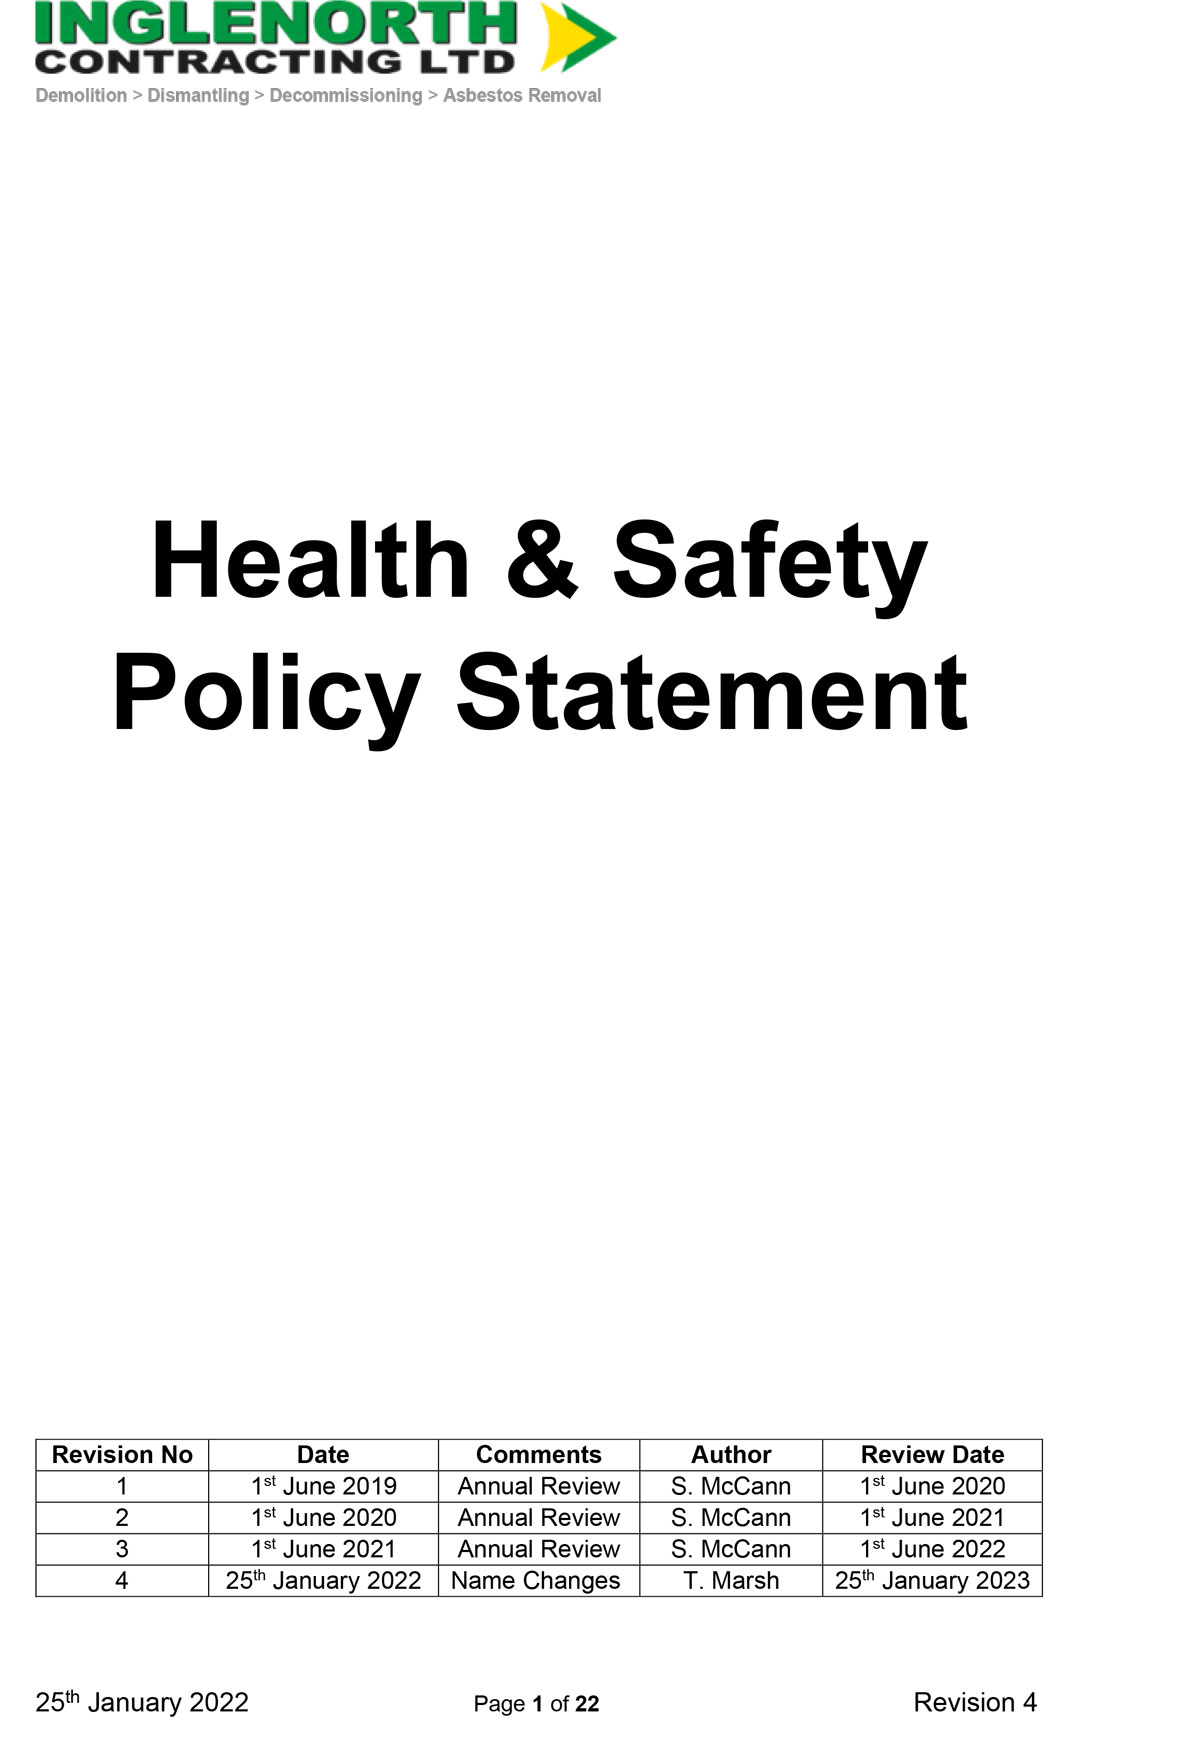 Health Safety Policy 25.01